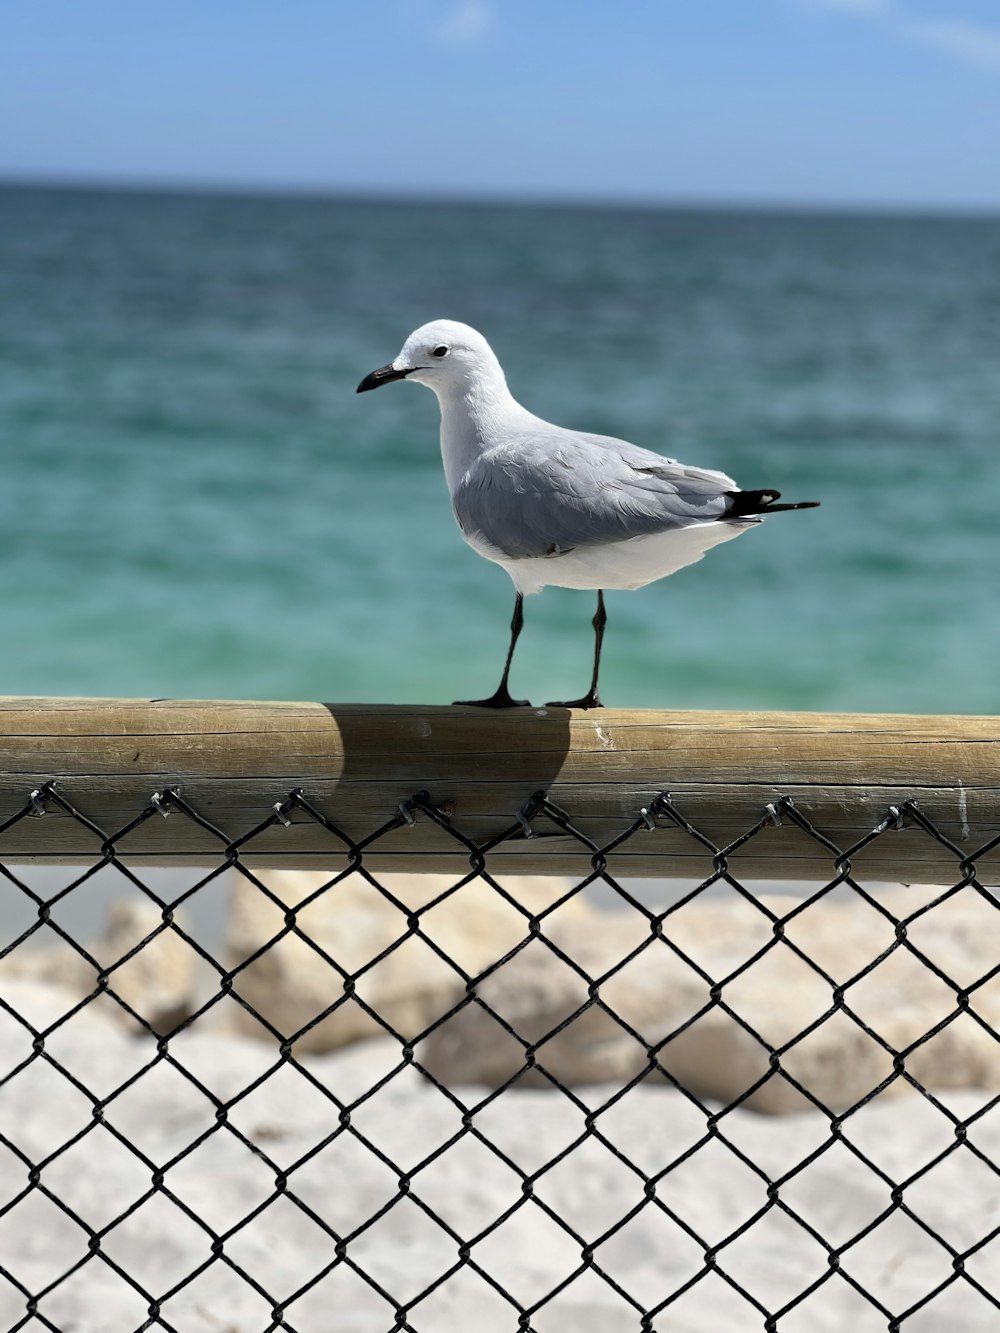 a seagull standing on a fence next to the ocean